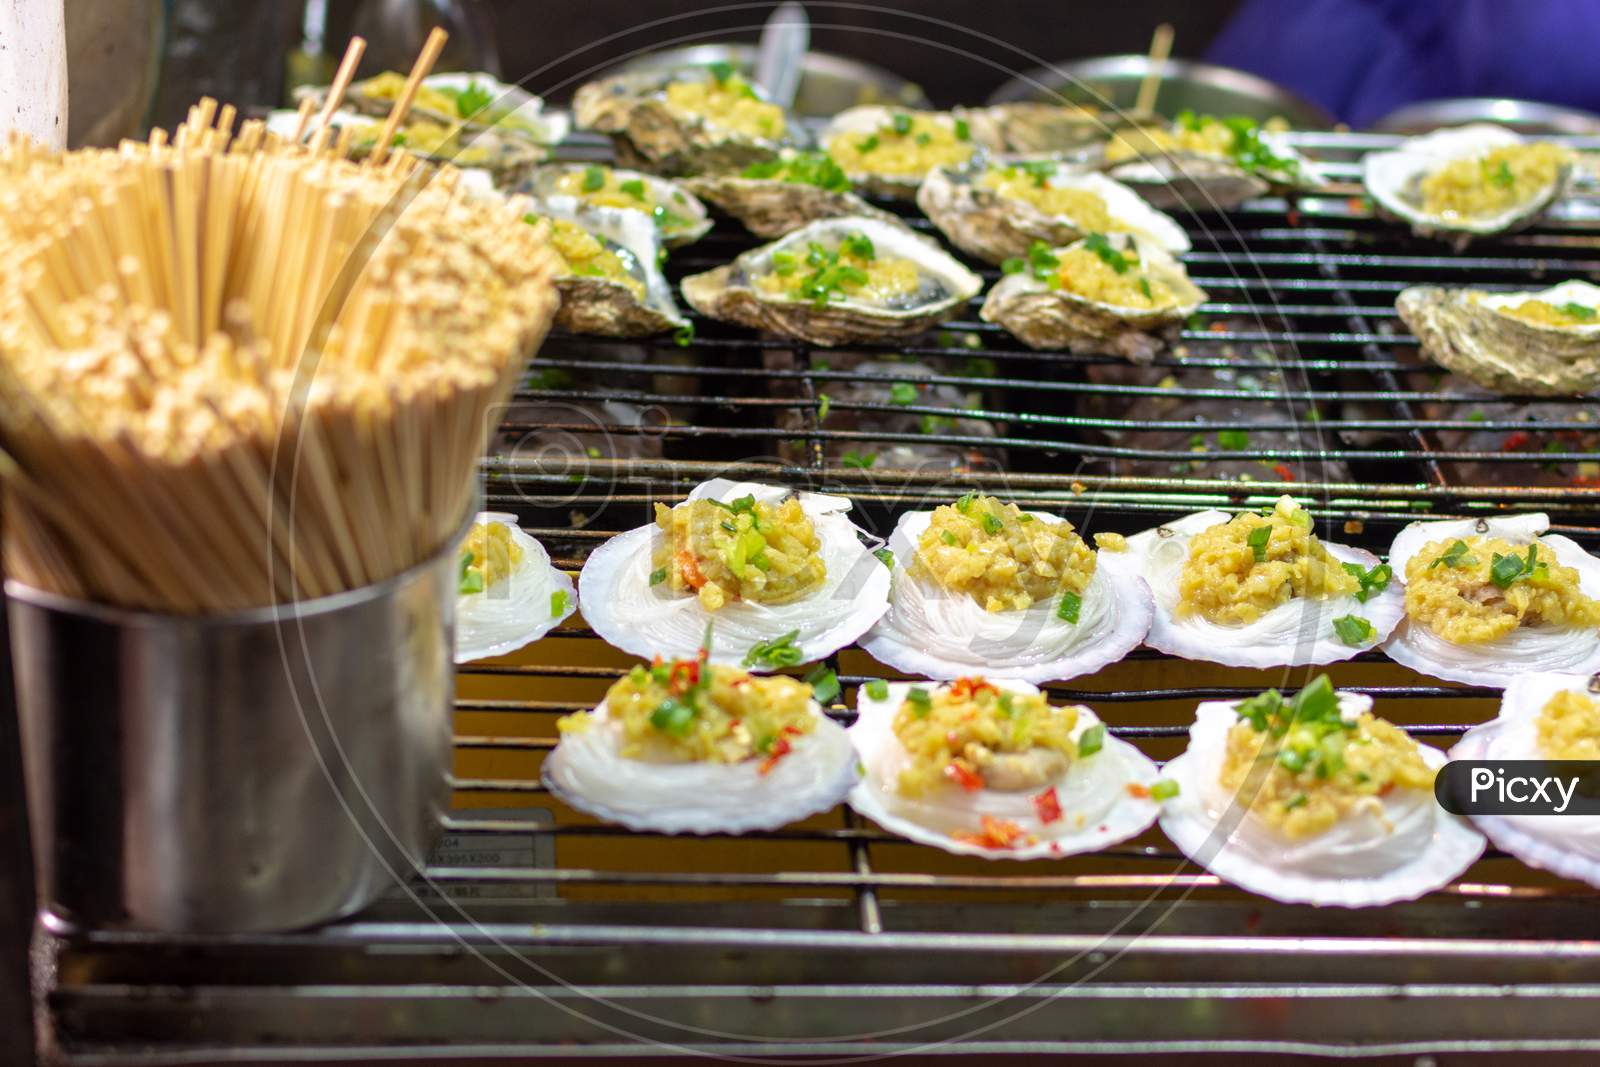 Oysters On The Street Market Food Stall In Luoyang Old City, Henan, China